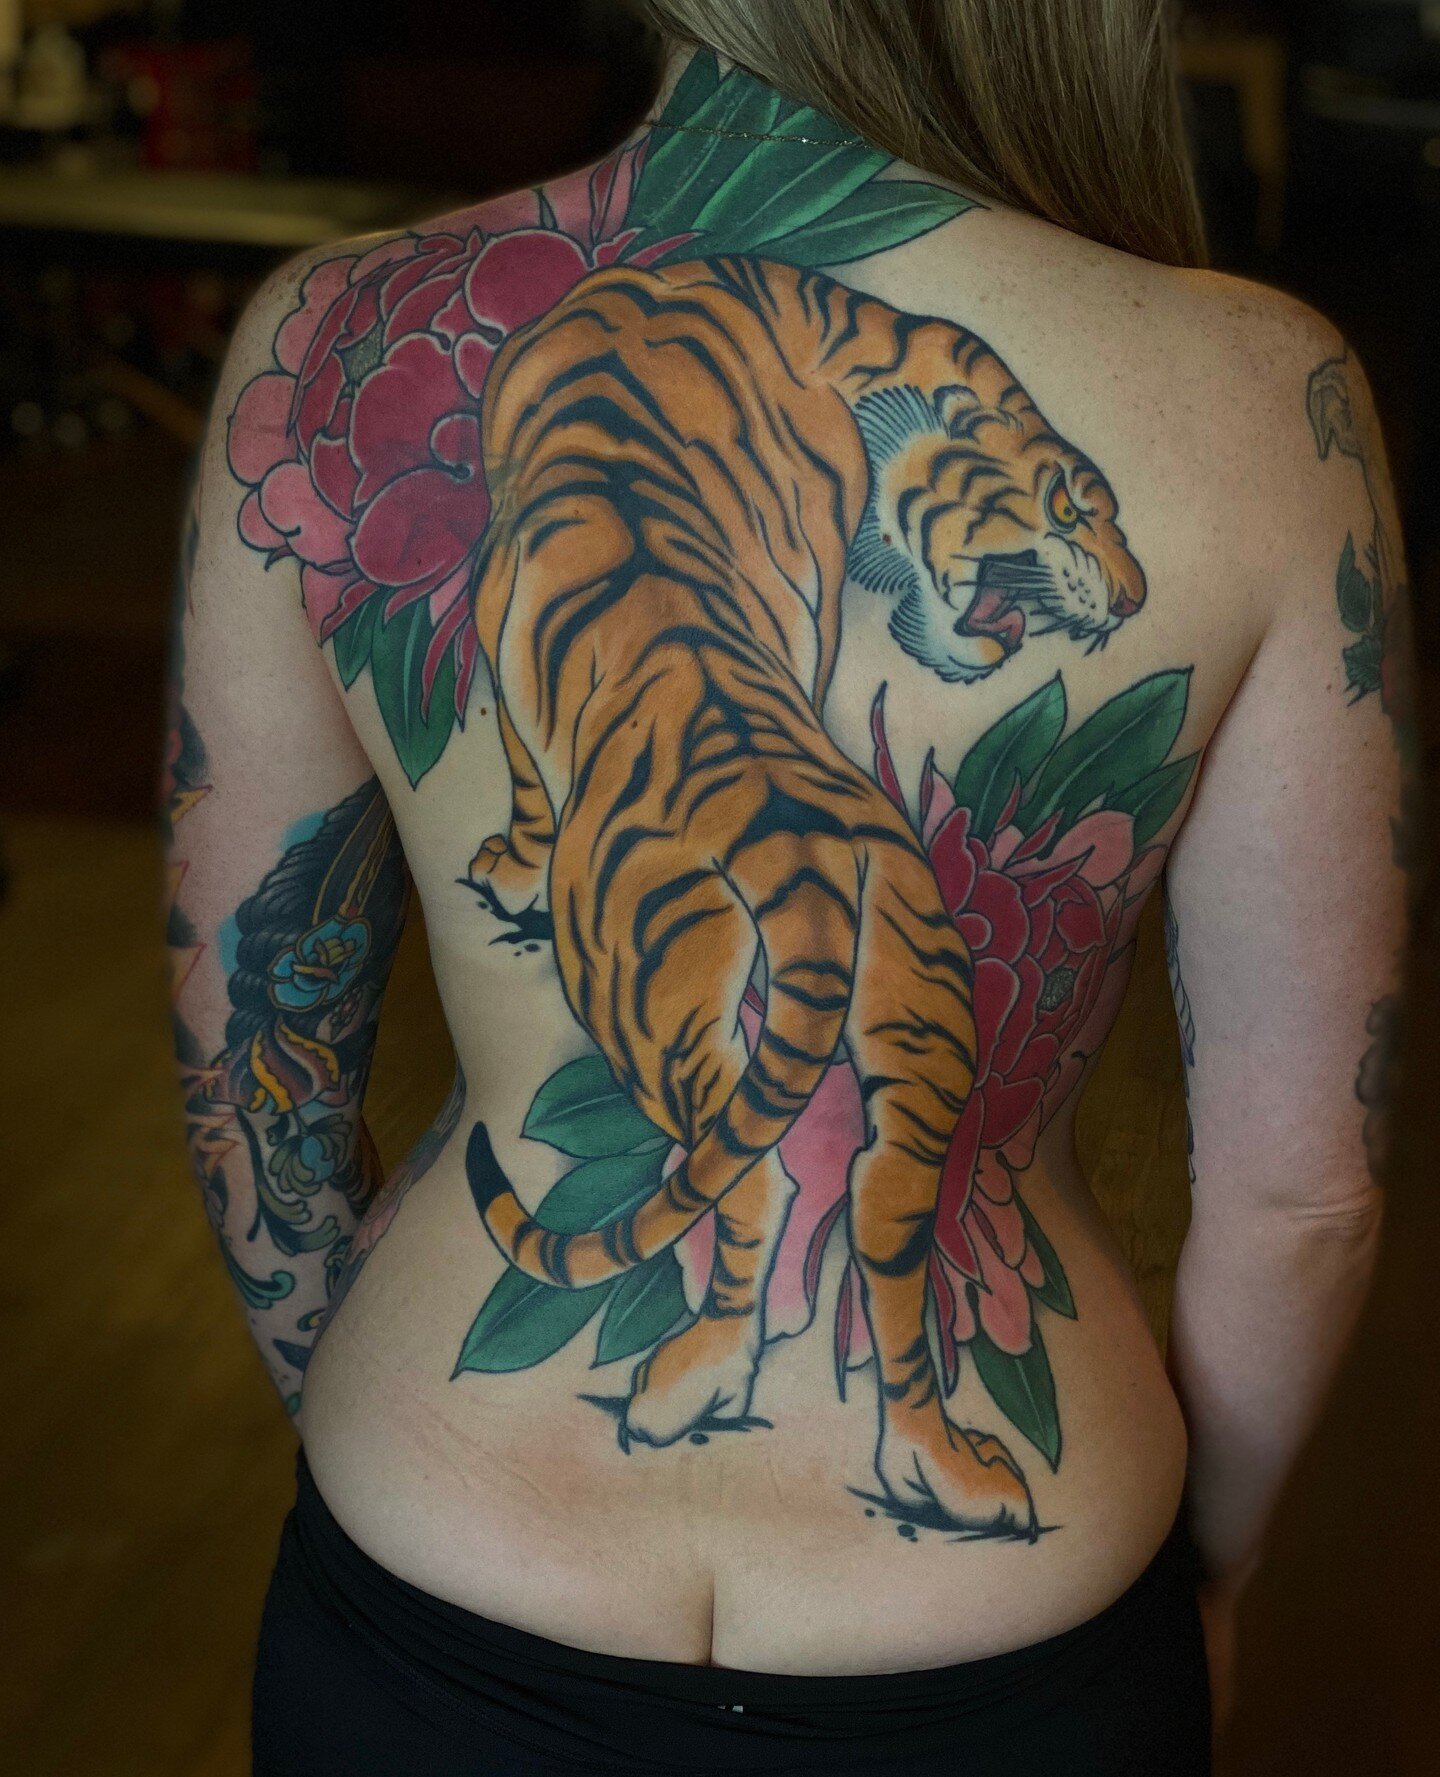 @xkealyx tiger from a couple of years ago. Thanks for the commitment, Kealy. Was absolutely a pleasure. ⁠
⁠
⁠
⁠
.⁠
.⁠
.⁠
.⁠
#ink #backtattoo #tattooaddict #inkofinstagram #inkaddict #inkedandsexy #tattooers #backtattoos #chesttattoos #abstractart #in